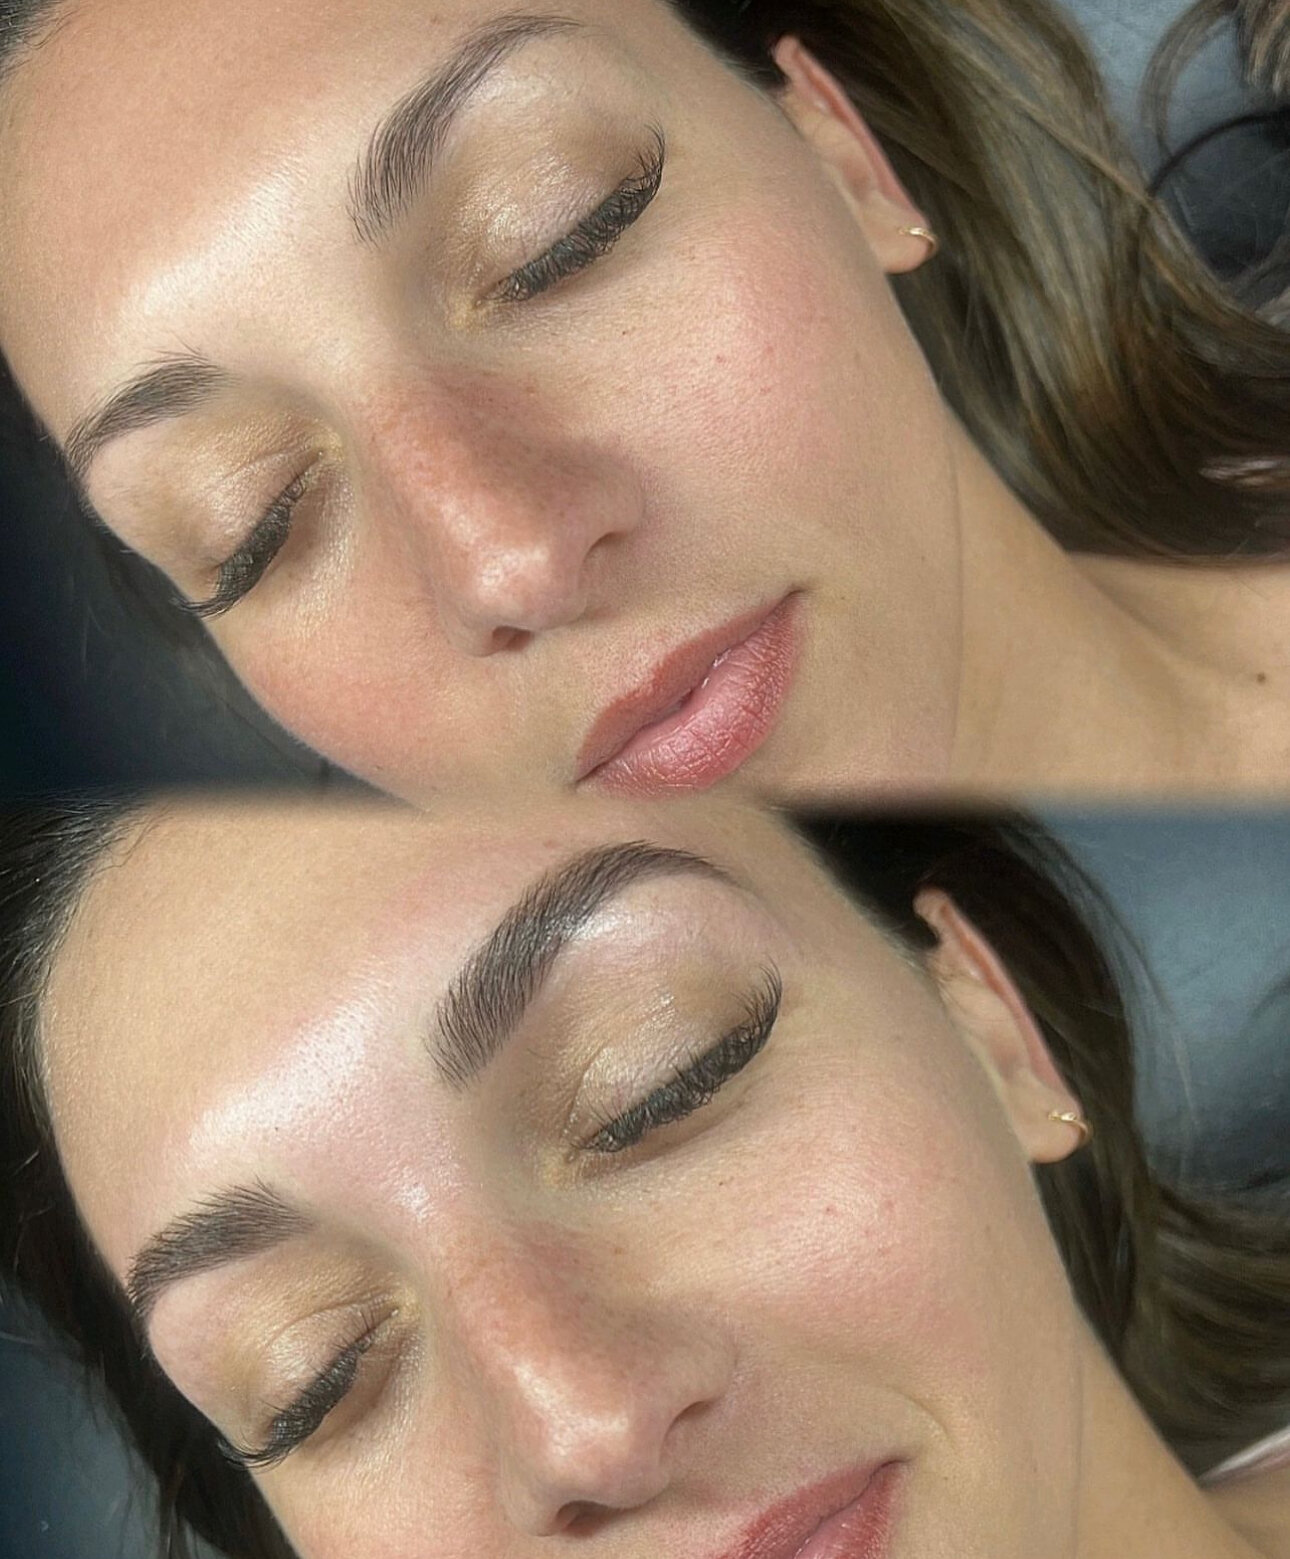 Transform your brows from ordinary to extraordinary with Brow Henna + Shaping! Say goodbye to sparse and uneven brows and hello to perfectly sculpted arches that frame your face flawlessly! 💖✨

Andrea, our expert esthetician and brow artist can tail